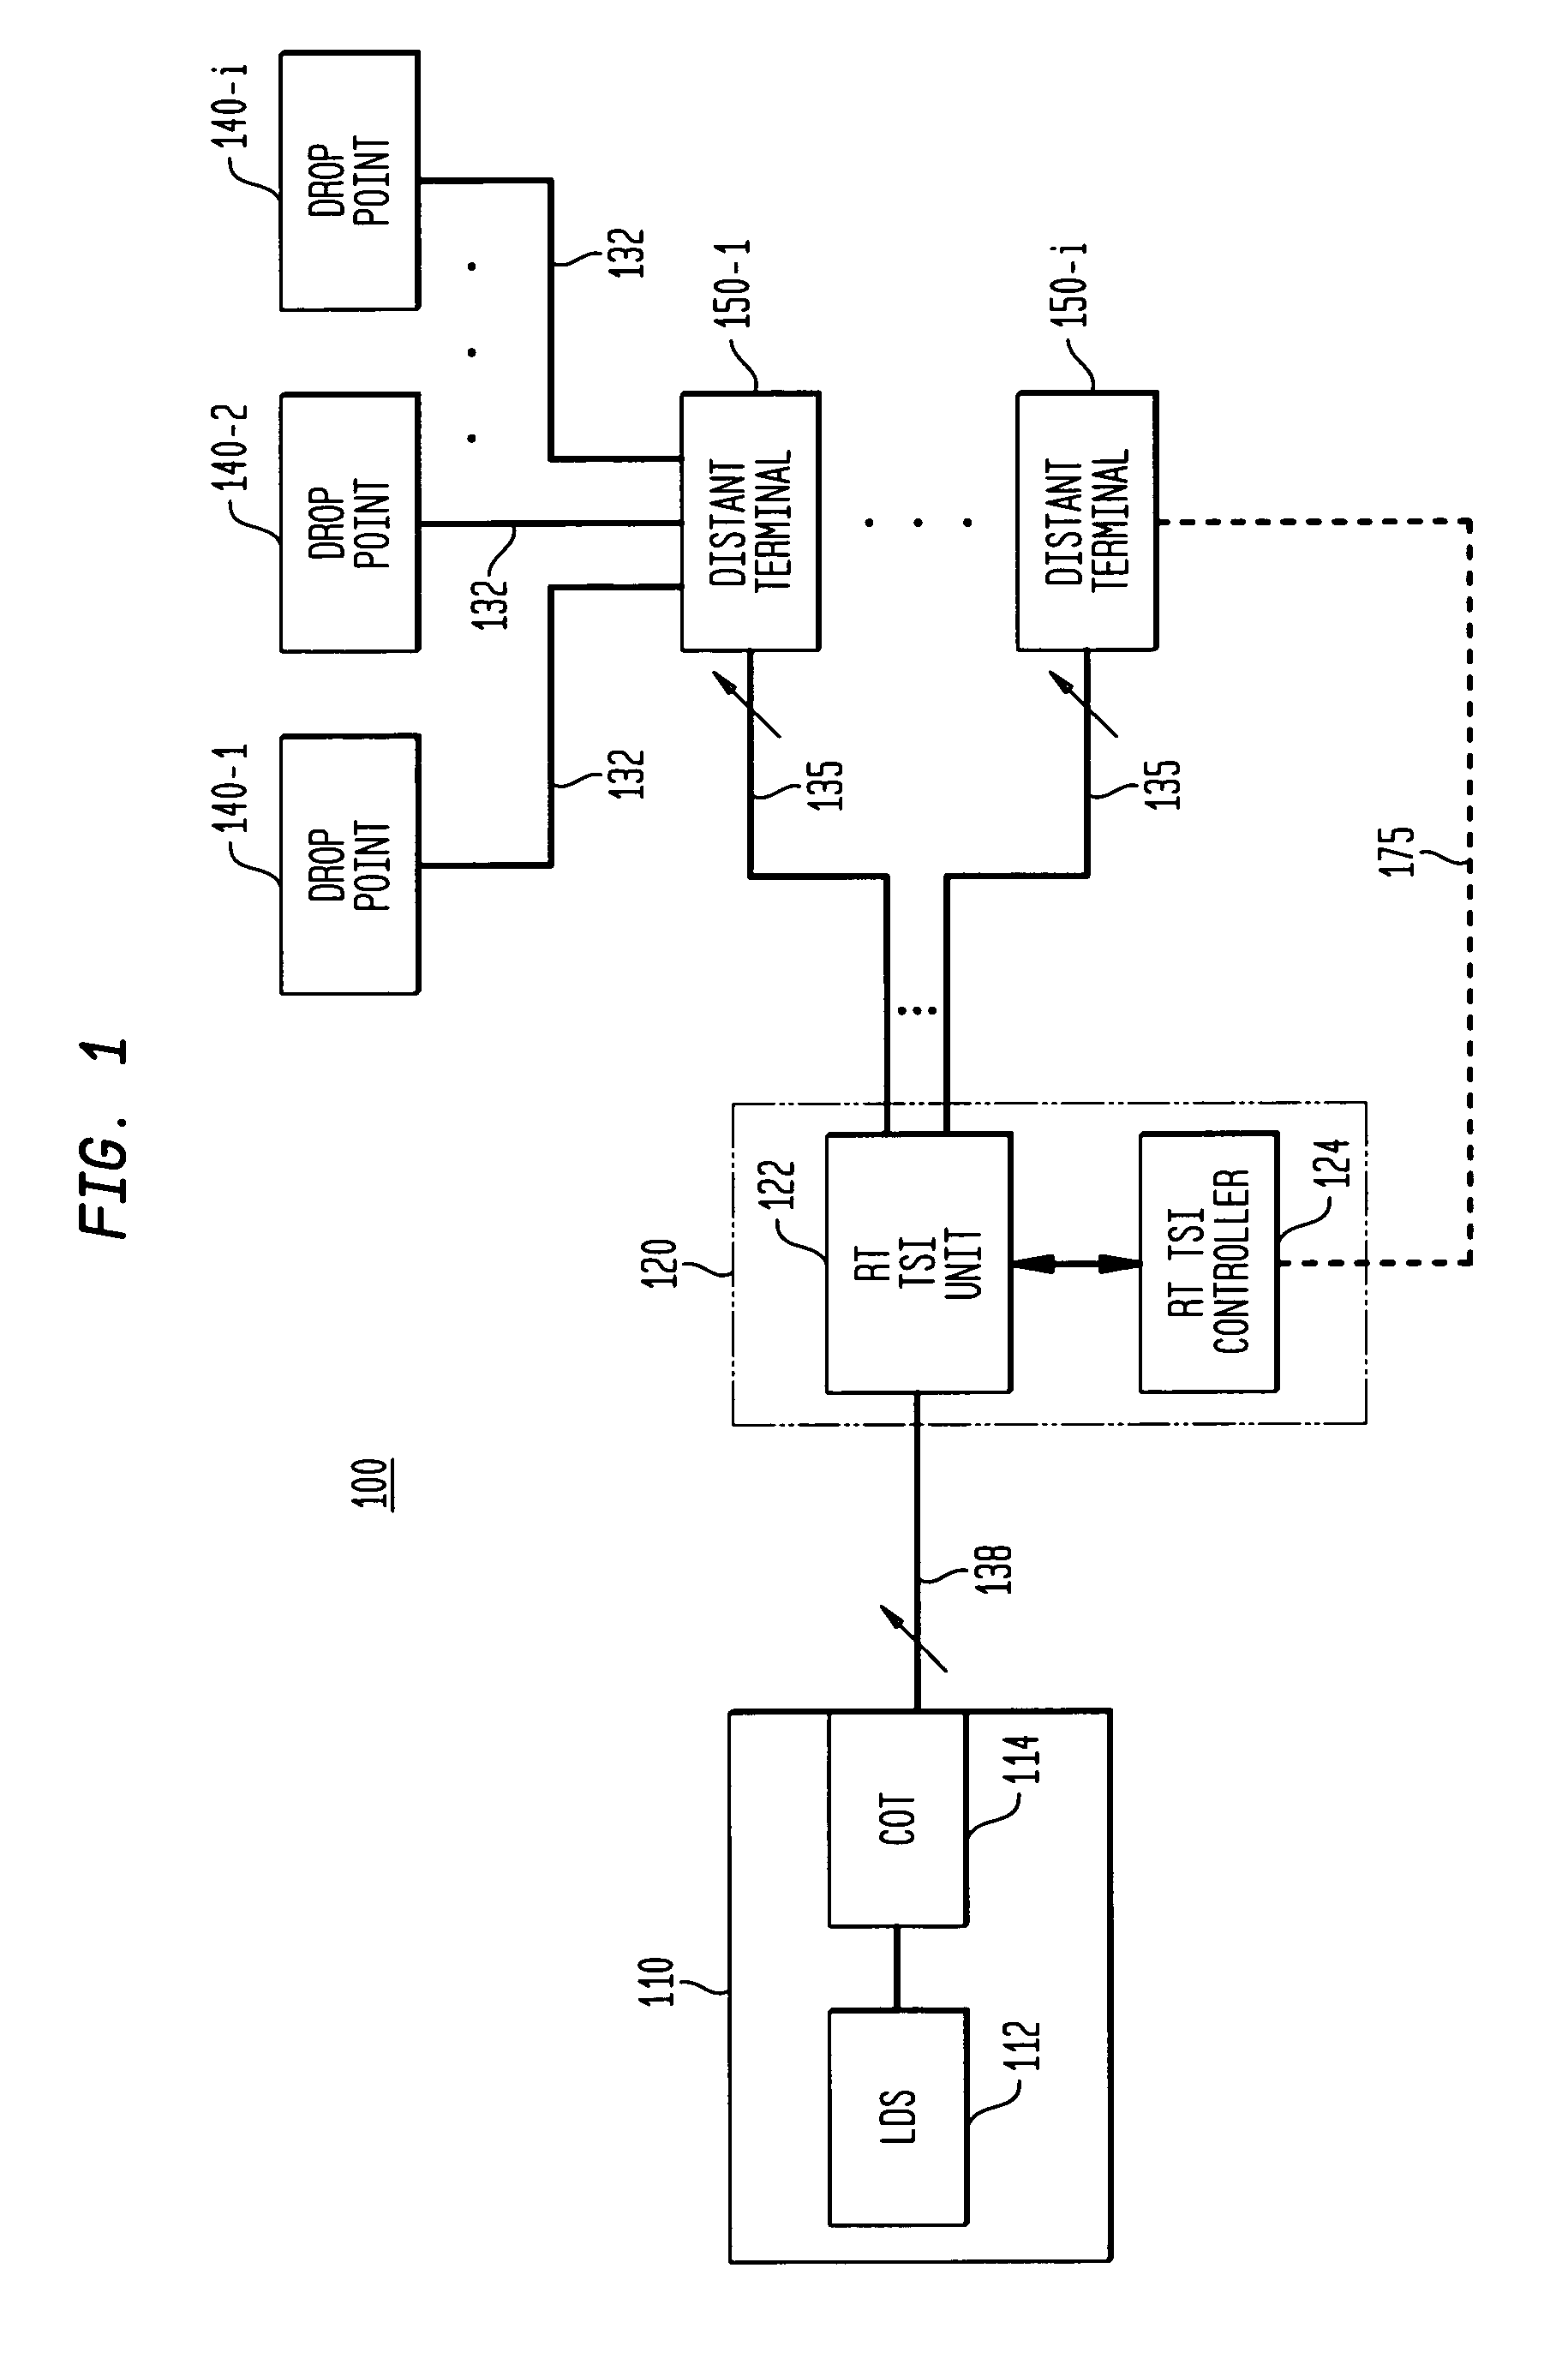 Method and apparatus for provisioning distribution channels in a communications network